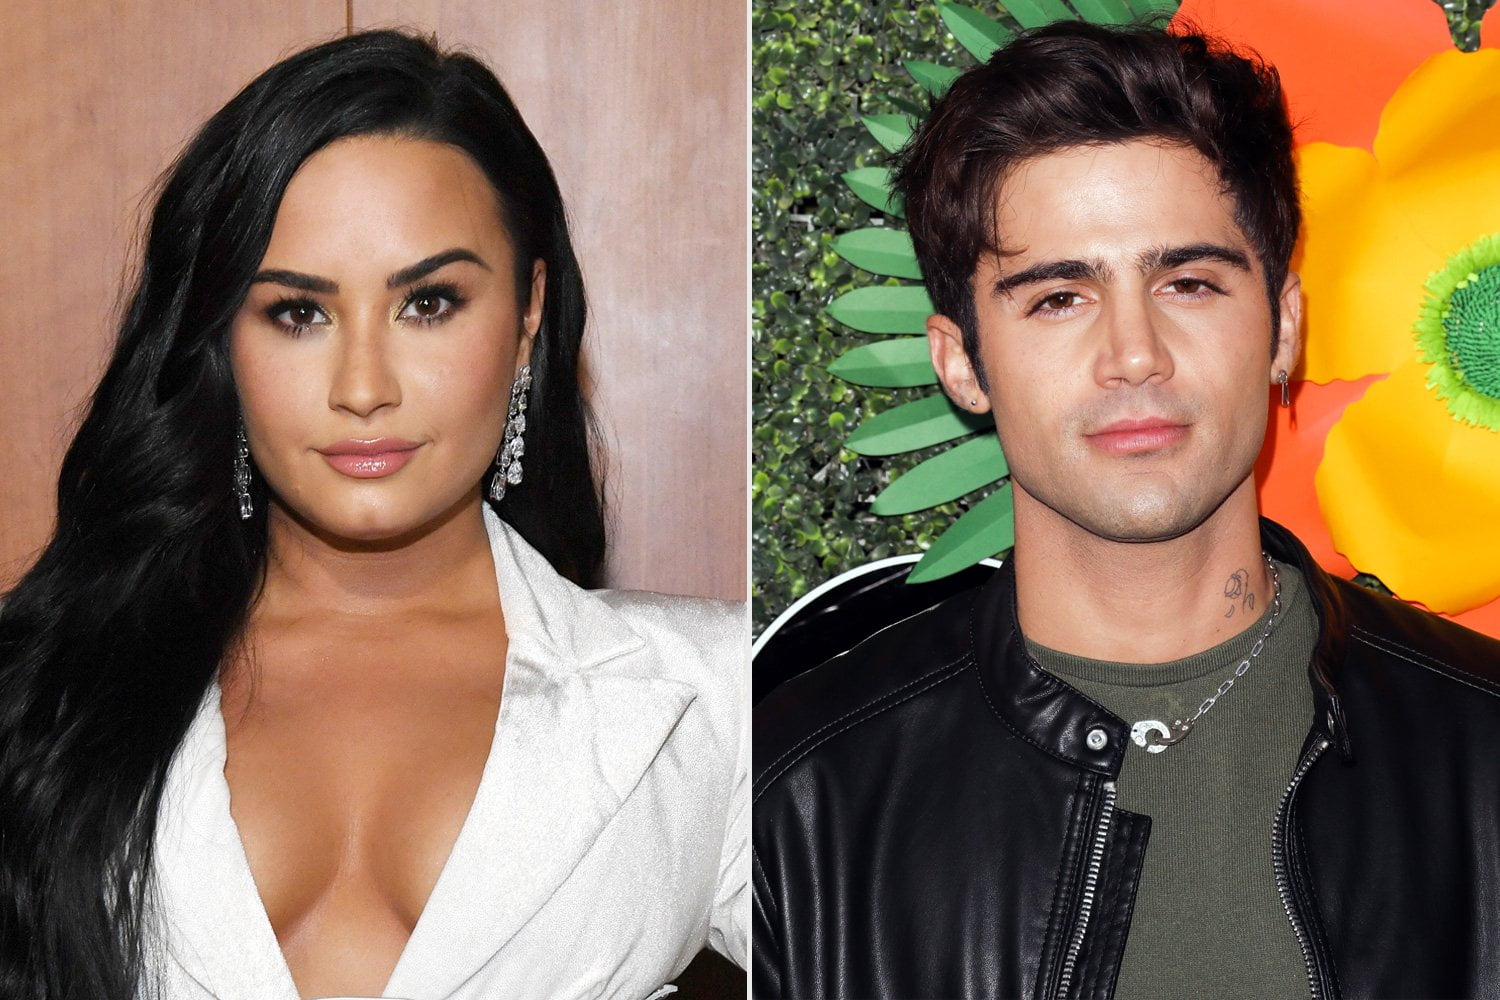 Demi Lovato – Is She Ready To Date Again After Her Max Ehrich Breakup?